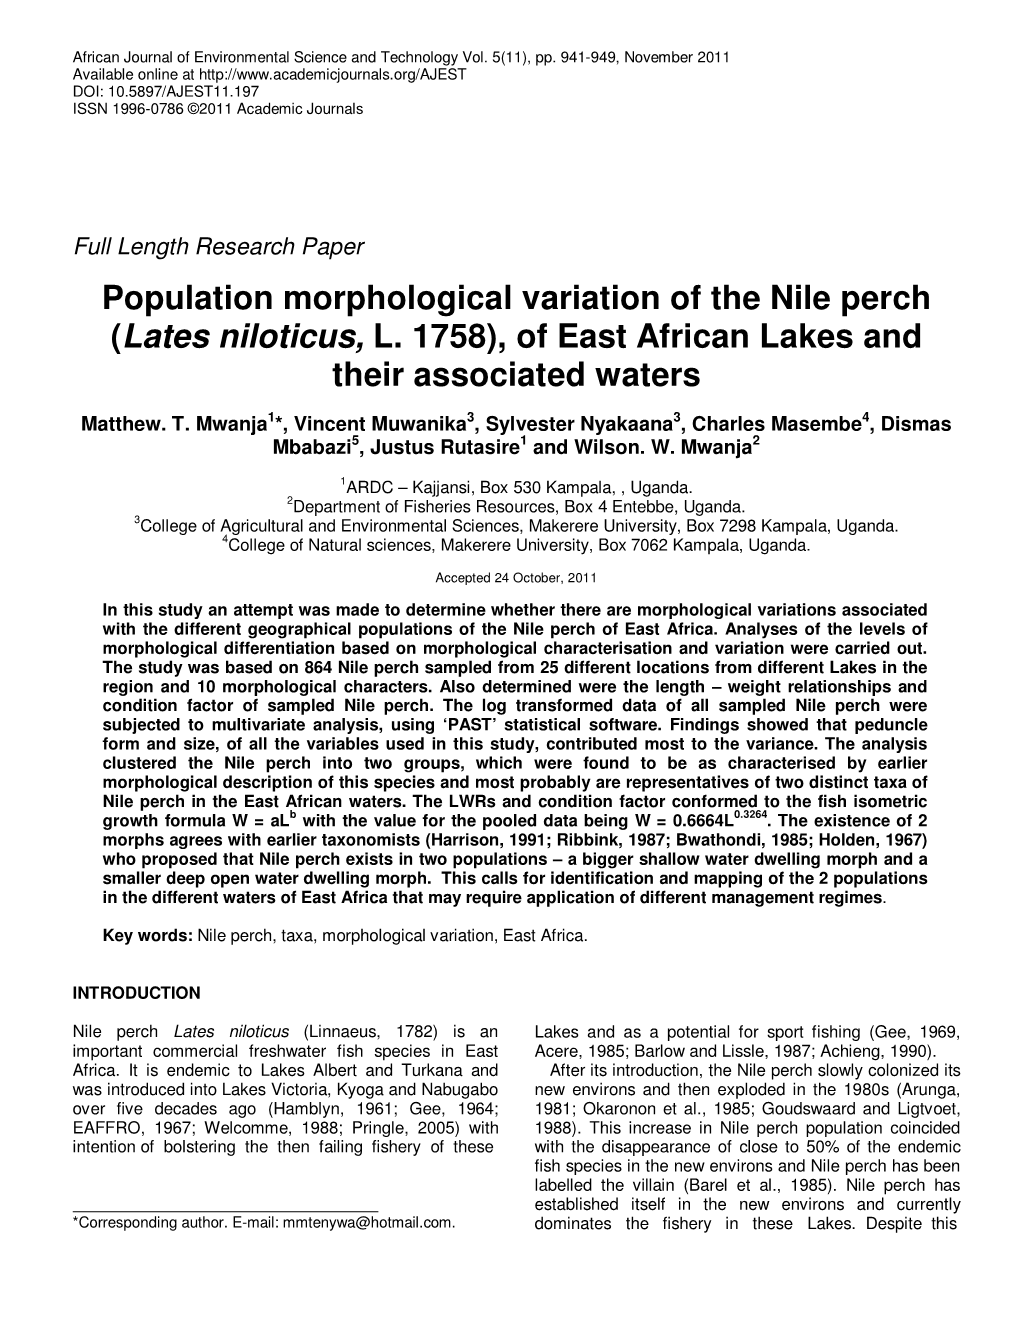 Population Morphological Variation of the Nile Perch (Lates Niloticus, L